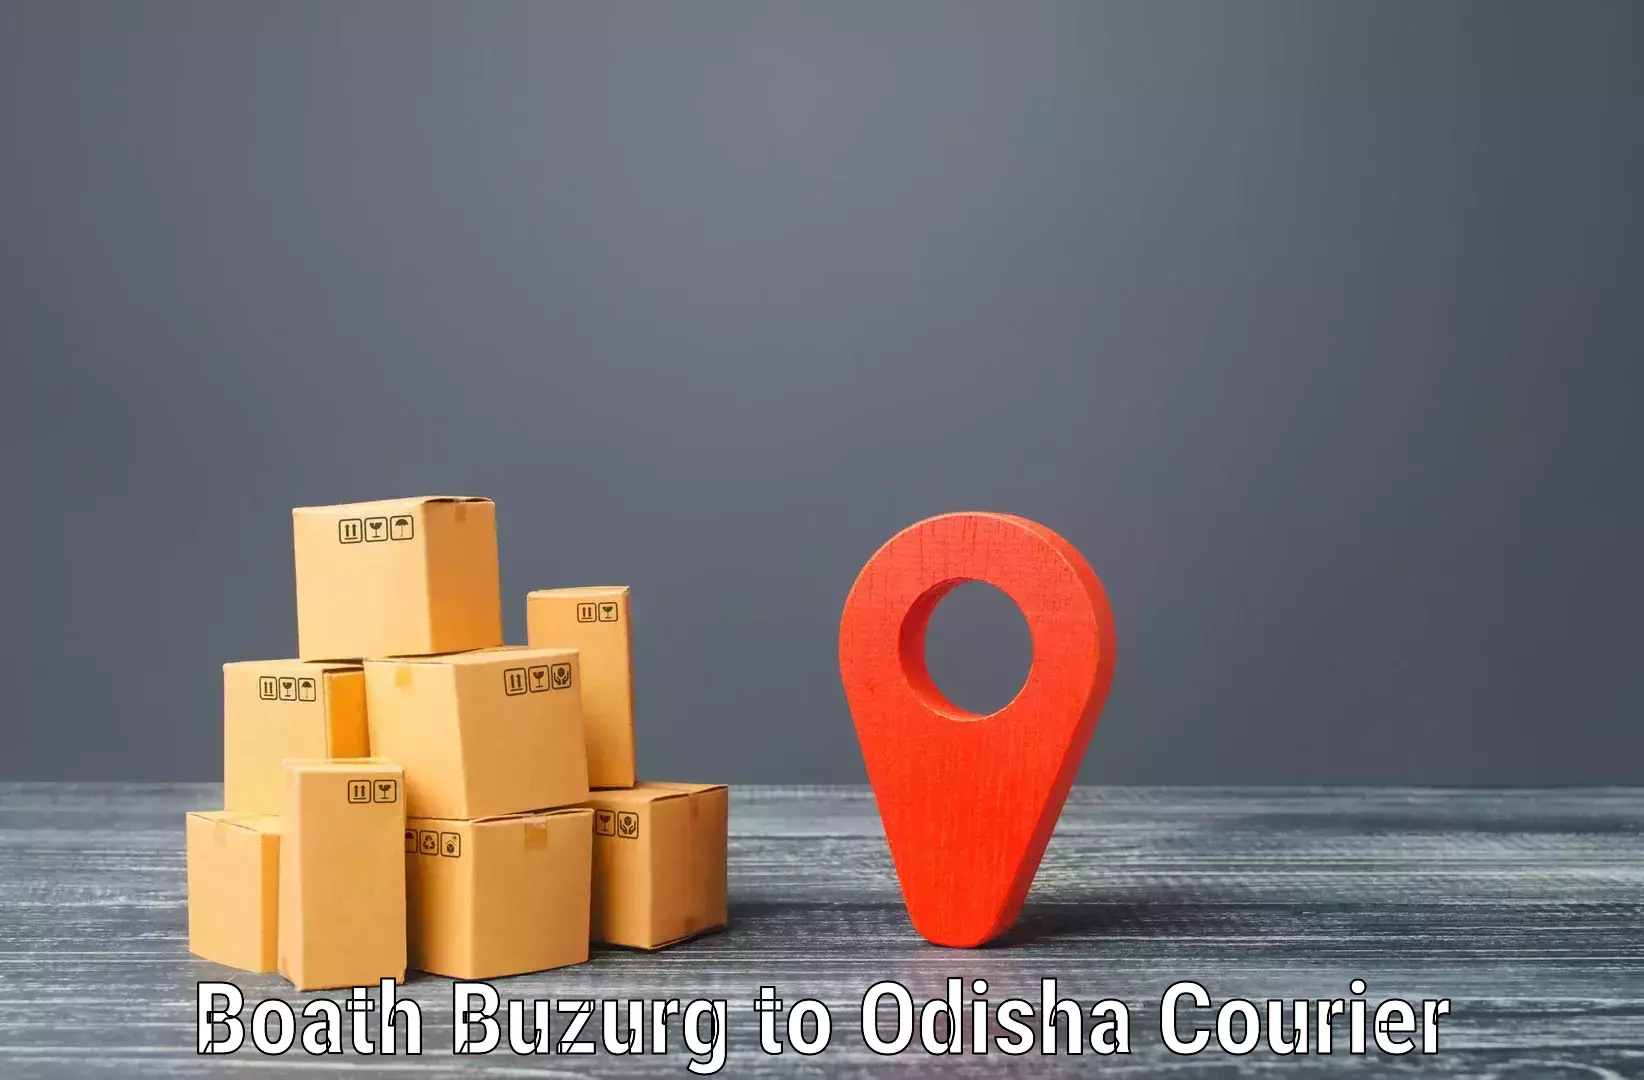 Express delivery network Boath Buzurg to Paradip Port